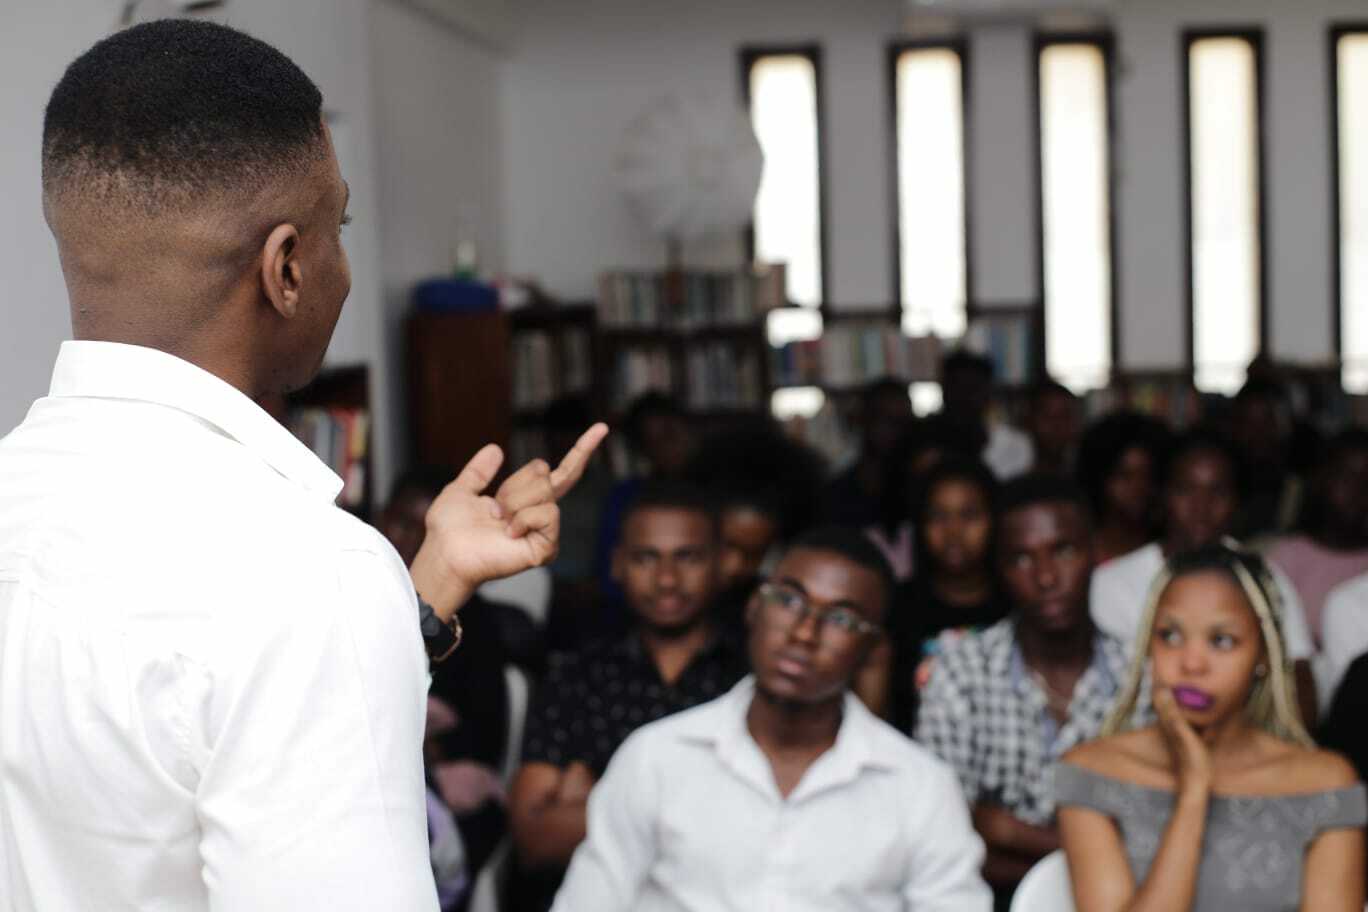 A speaker captured from the back speaking to the youth audience